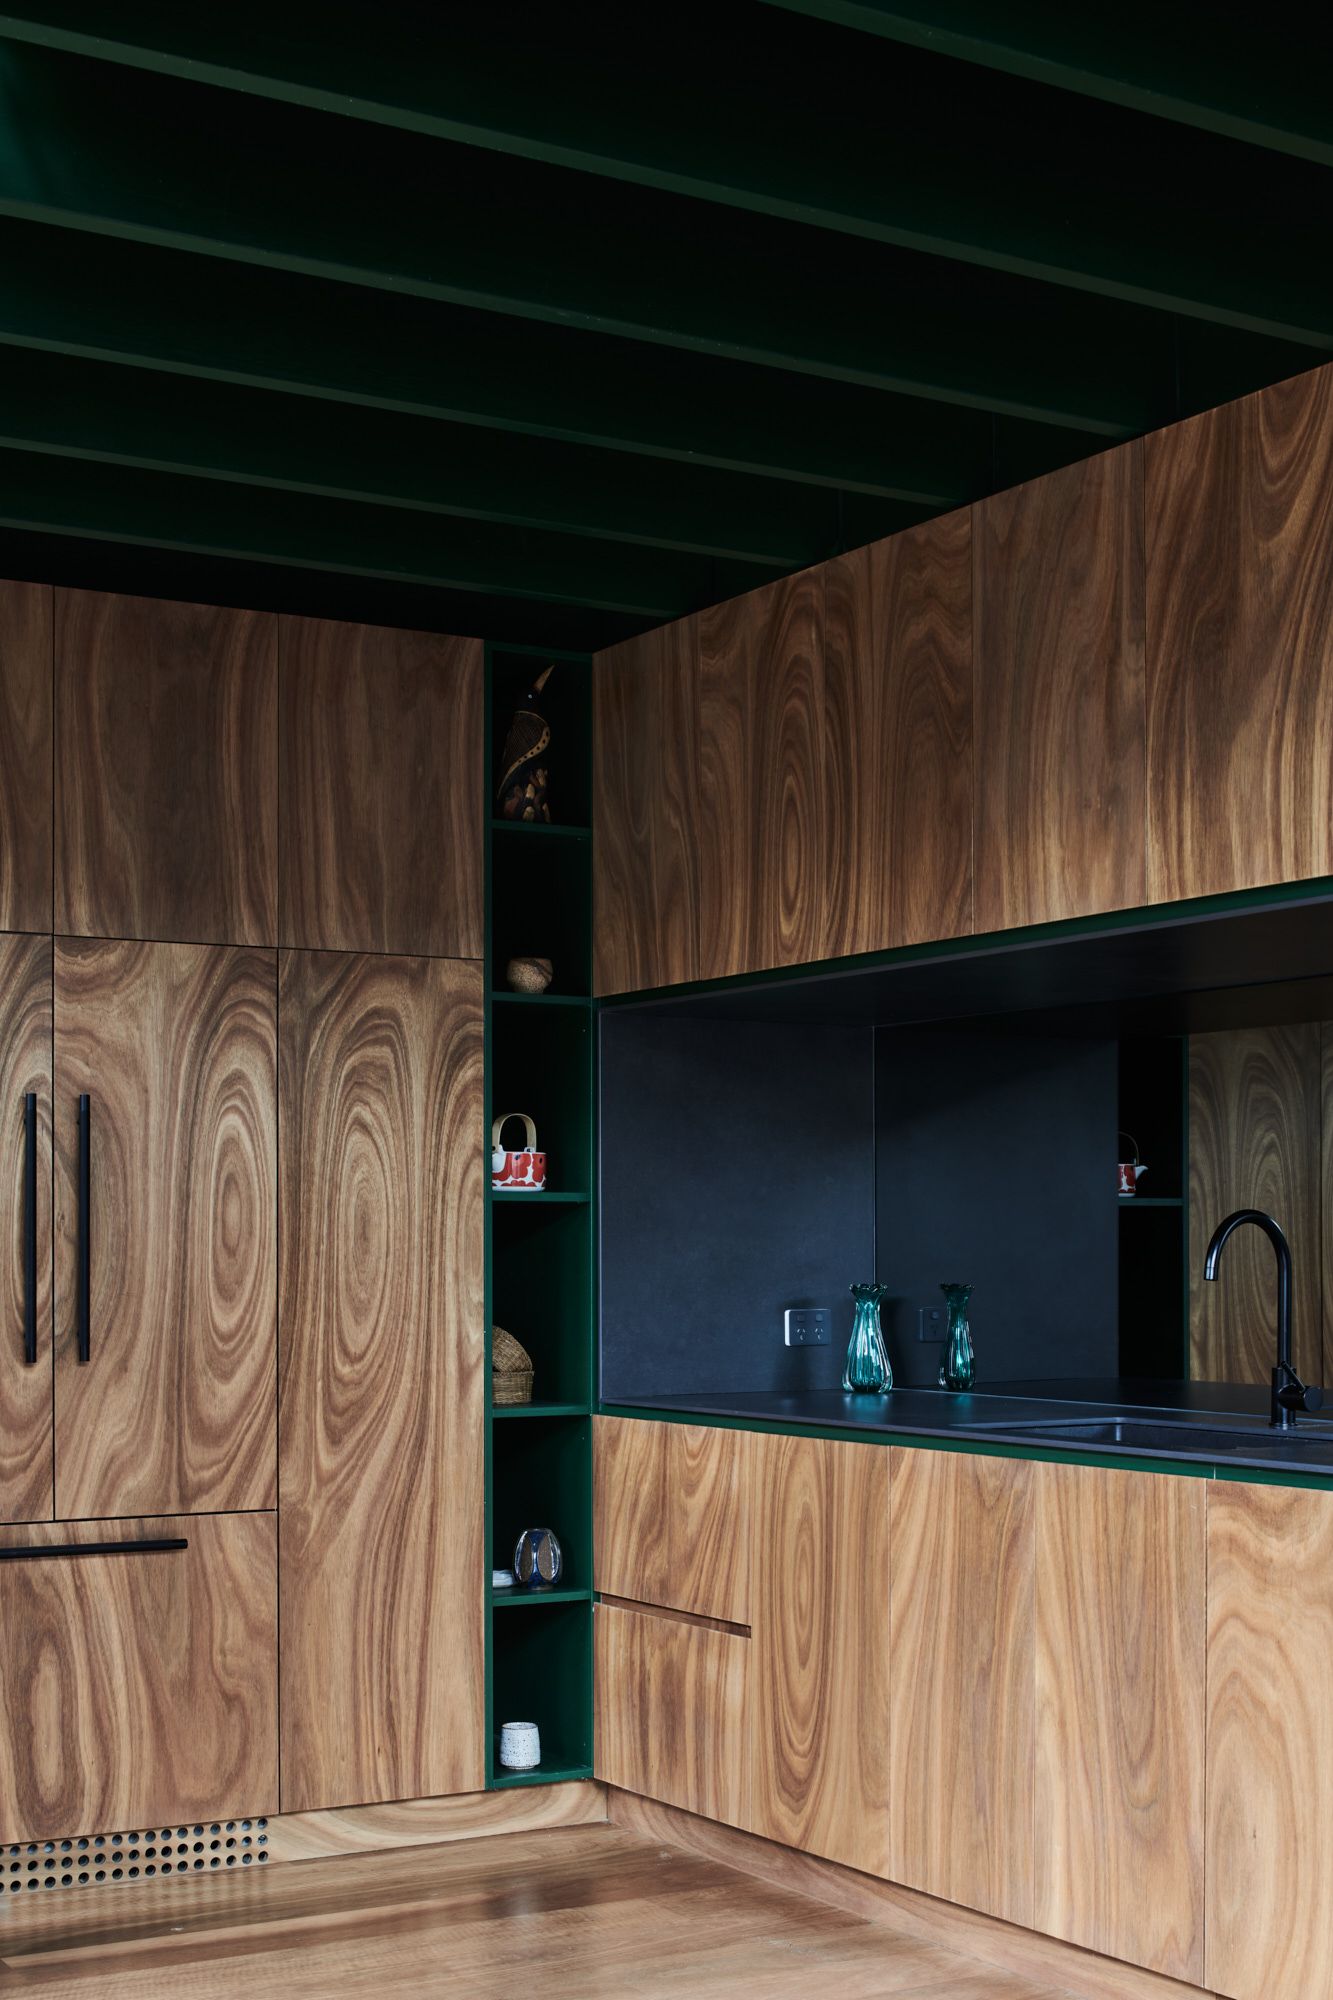 Hot Top Peak by FIGR Architecture. Detailed view of kitchen cabinetry/ 